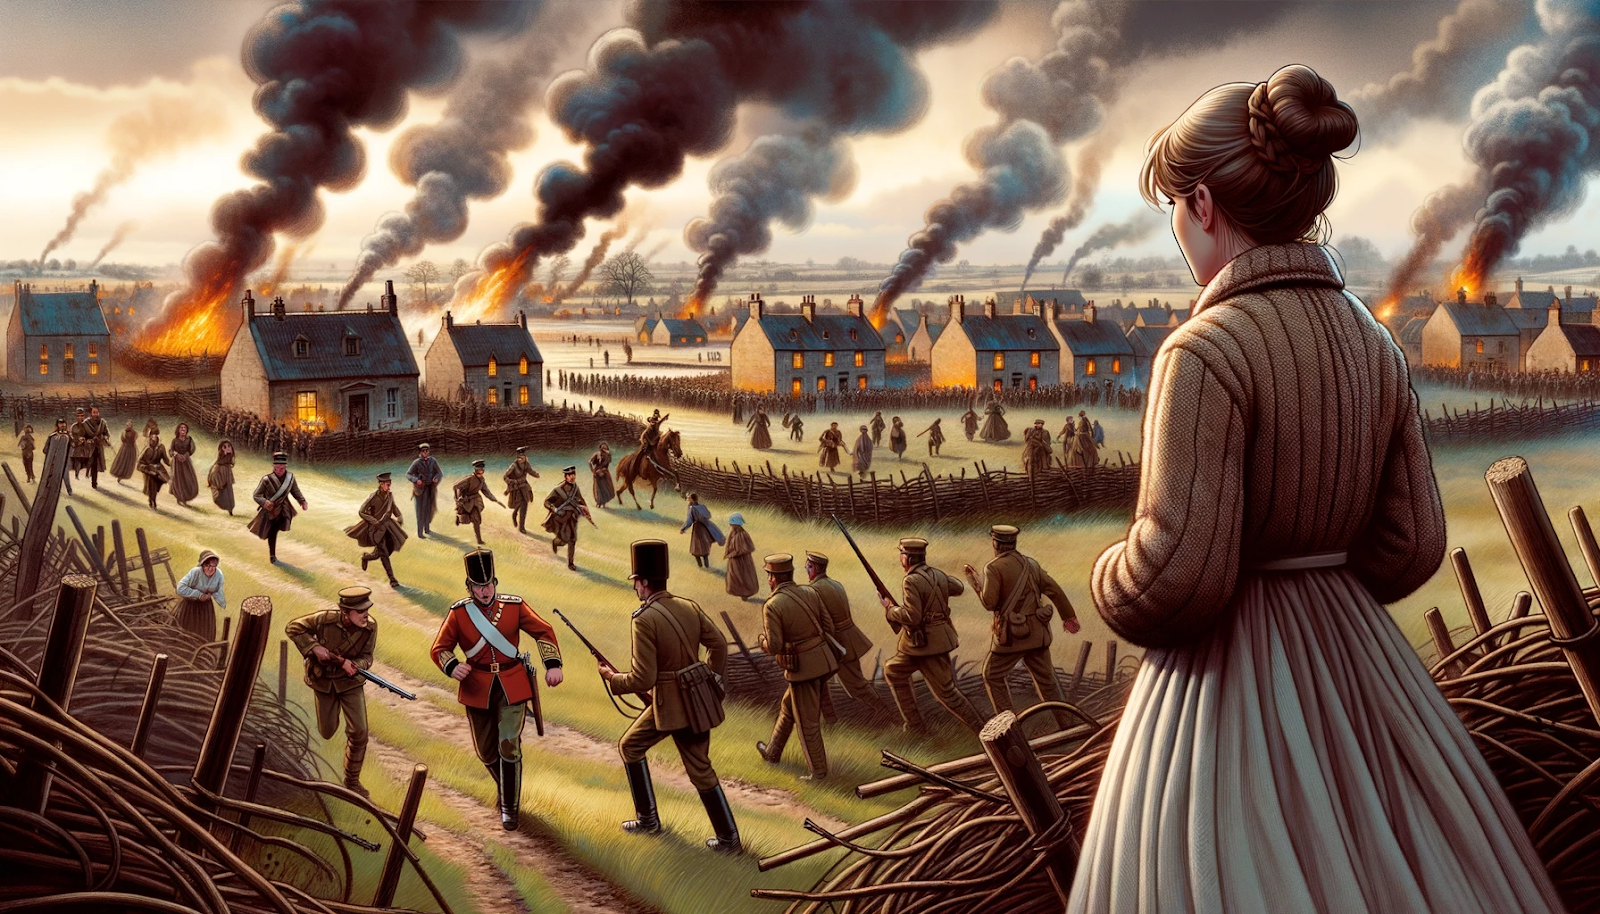 Illustration of Jenna standing on the outskirts of a war-torn village from a bygone era. Smoke rises from distant fires, and soldiers in old-fashioned uniforms rush about. In the midst of the chaos, Jenna recognizes a commanding soldier as her great-grandfather, James. They converse amidst the turmoil, and she watches him lead with determination and strength.